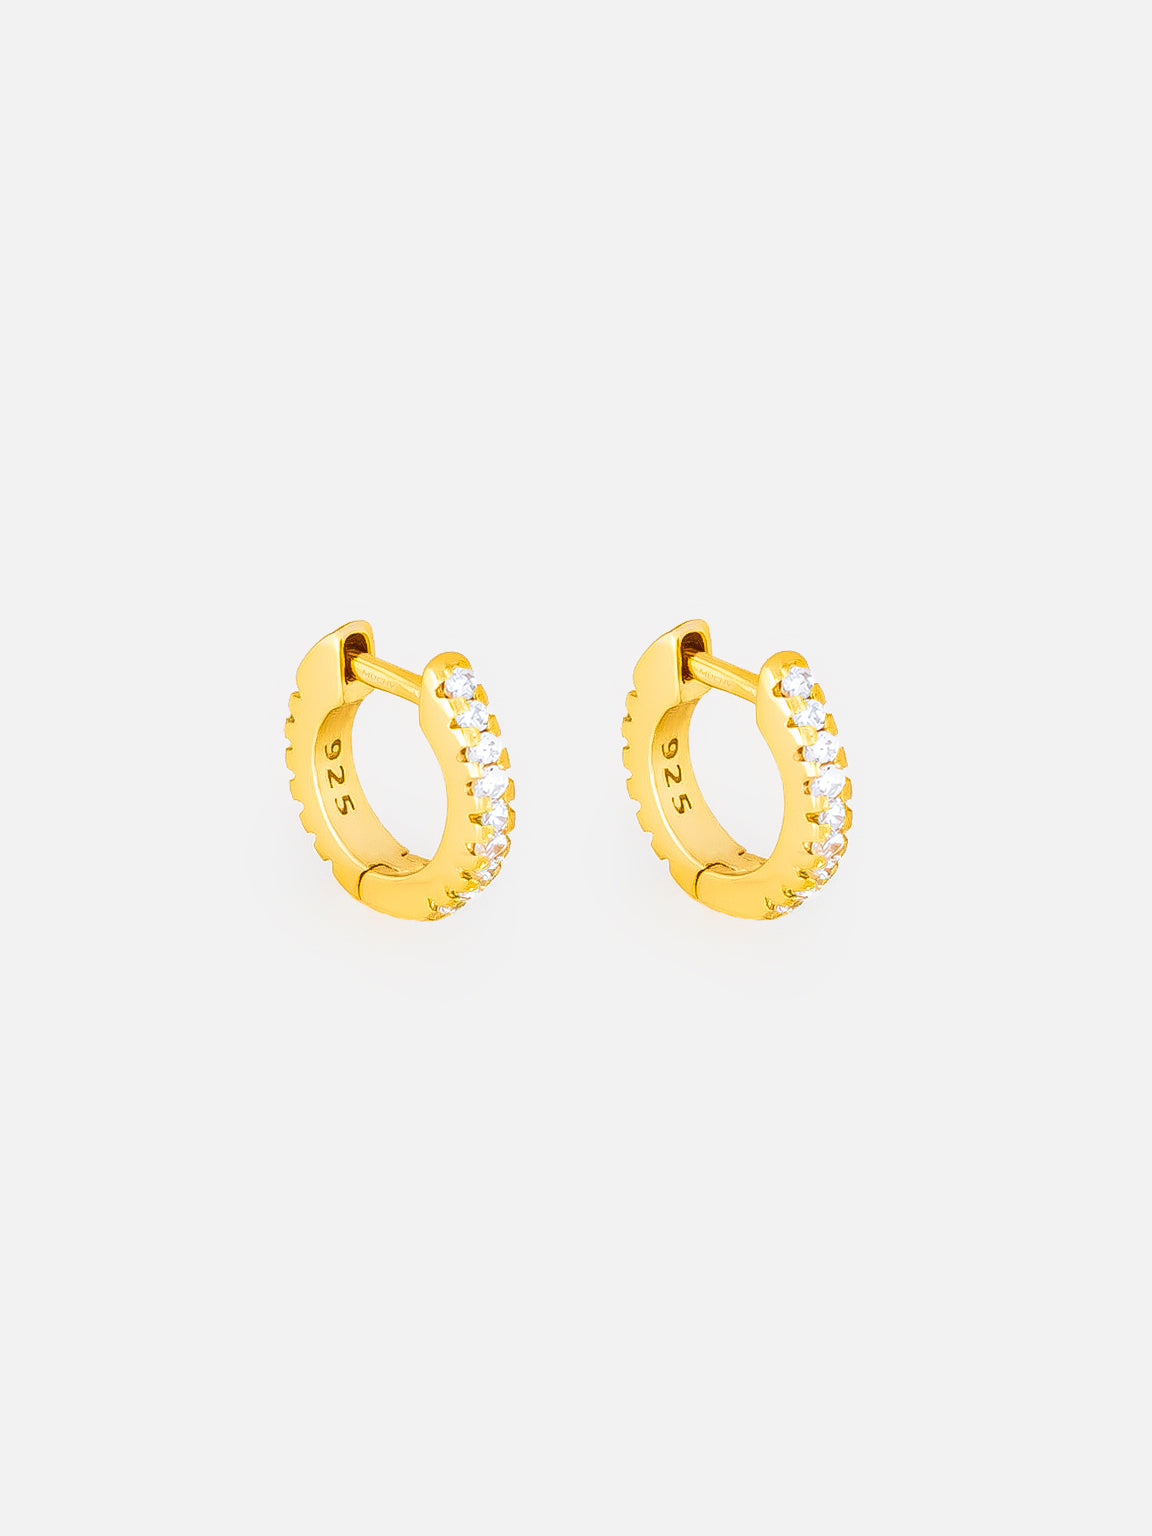 Gold Tiny Helix or Tragus Hoop Earrings with Stones